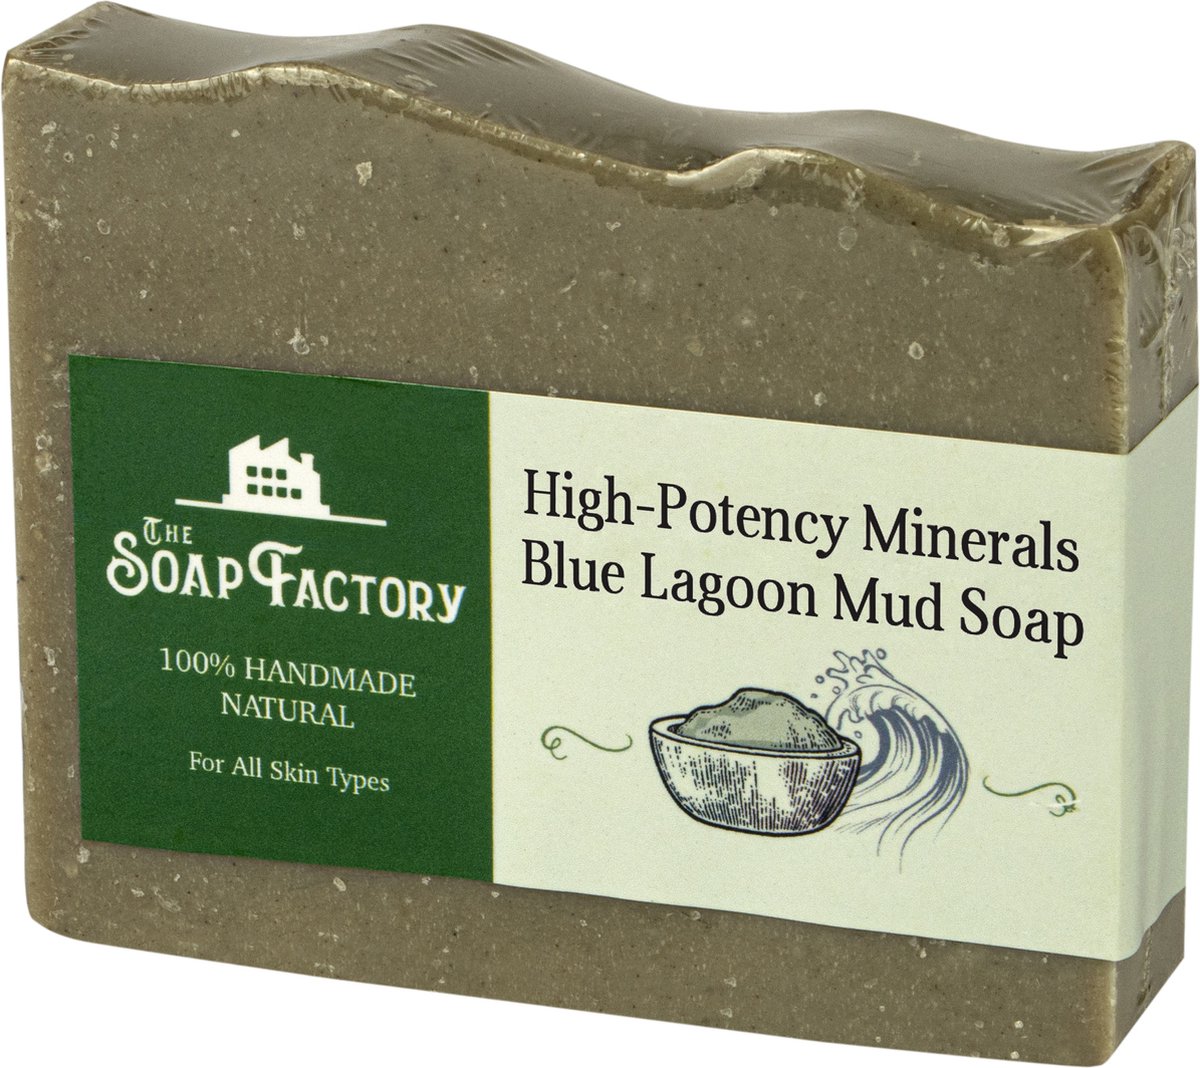 The Soap Factory High-Potency Minerals Blue Lagoon Mud Soap